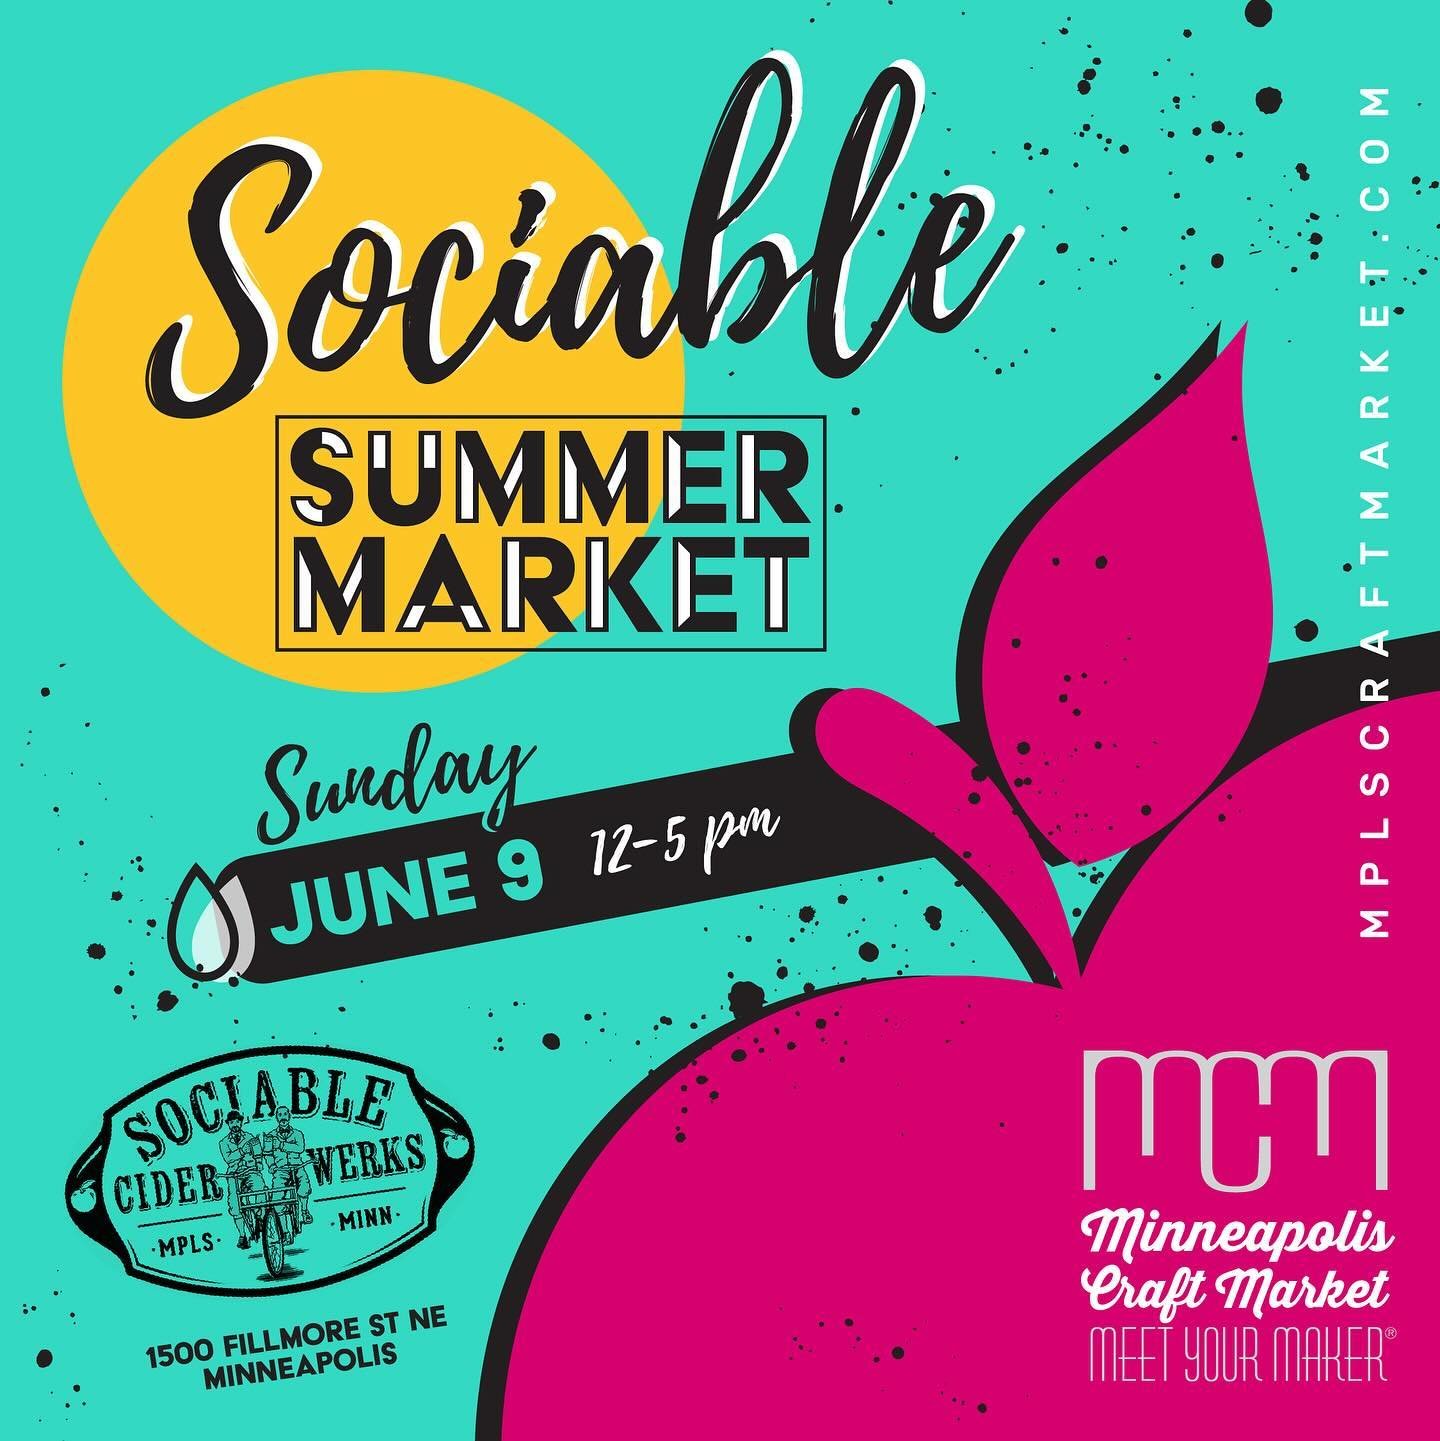 ☀️Soak up the sun and support local makers at the Sociable Summer Market! Join us on Sunday, June 9th for a day filled of pursing an array of MN made treasures while you sip 🍺delicious @sociablecider! @djbusterbaxter 🎵 will keep the good energy goi